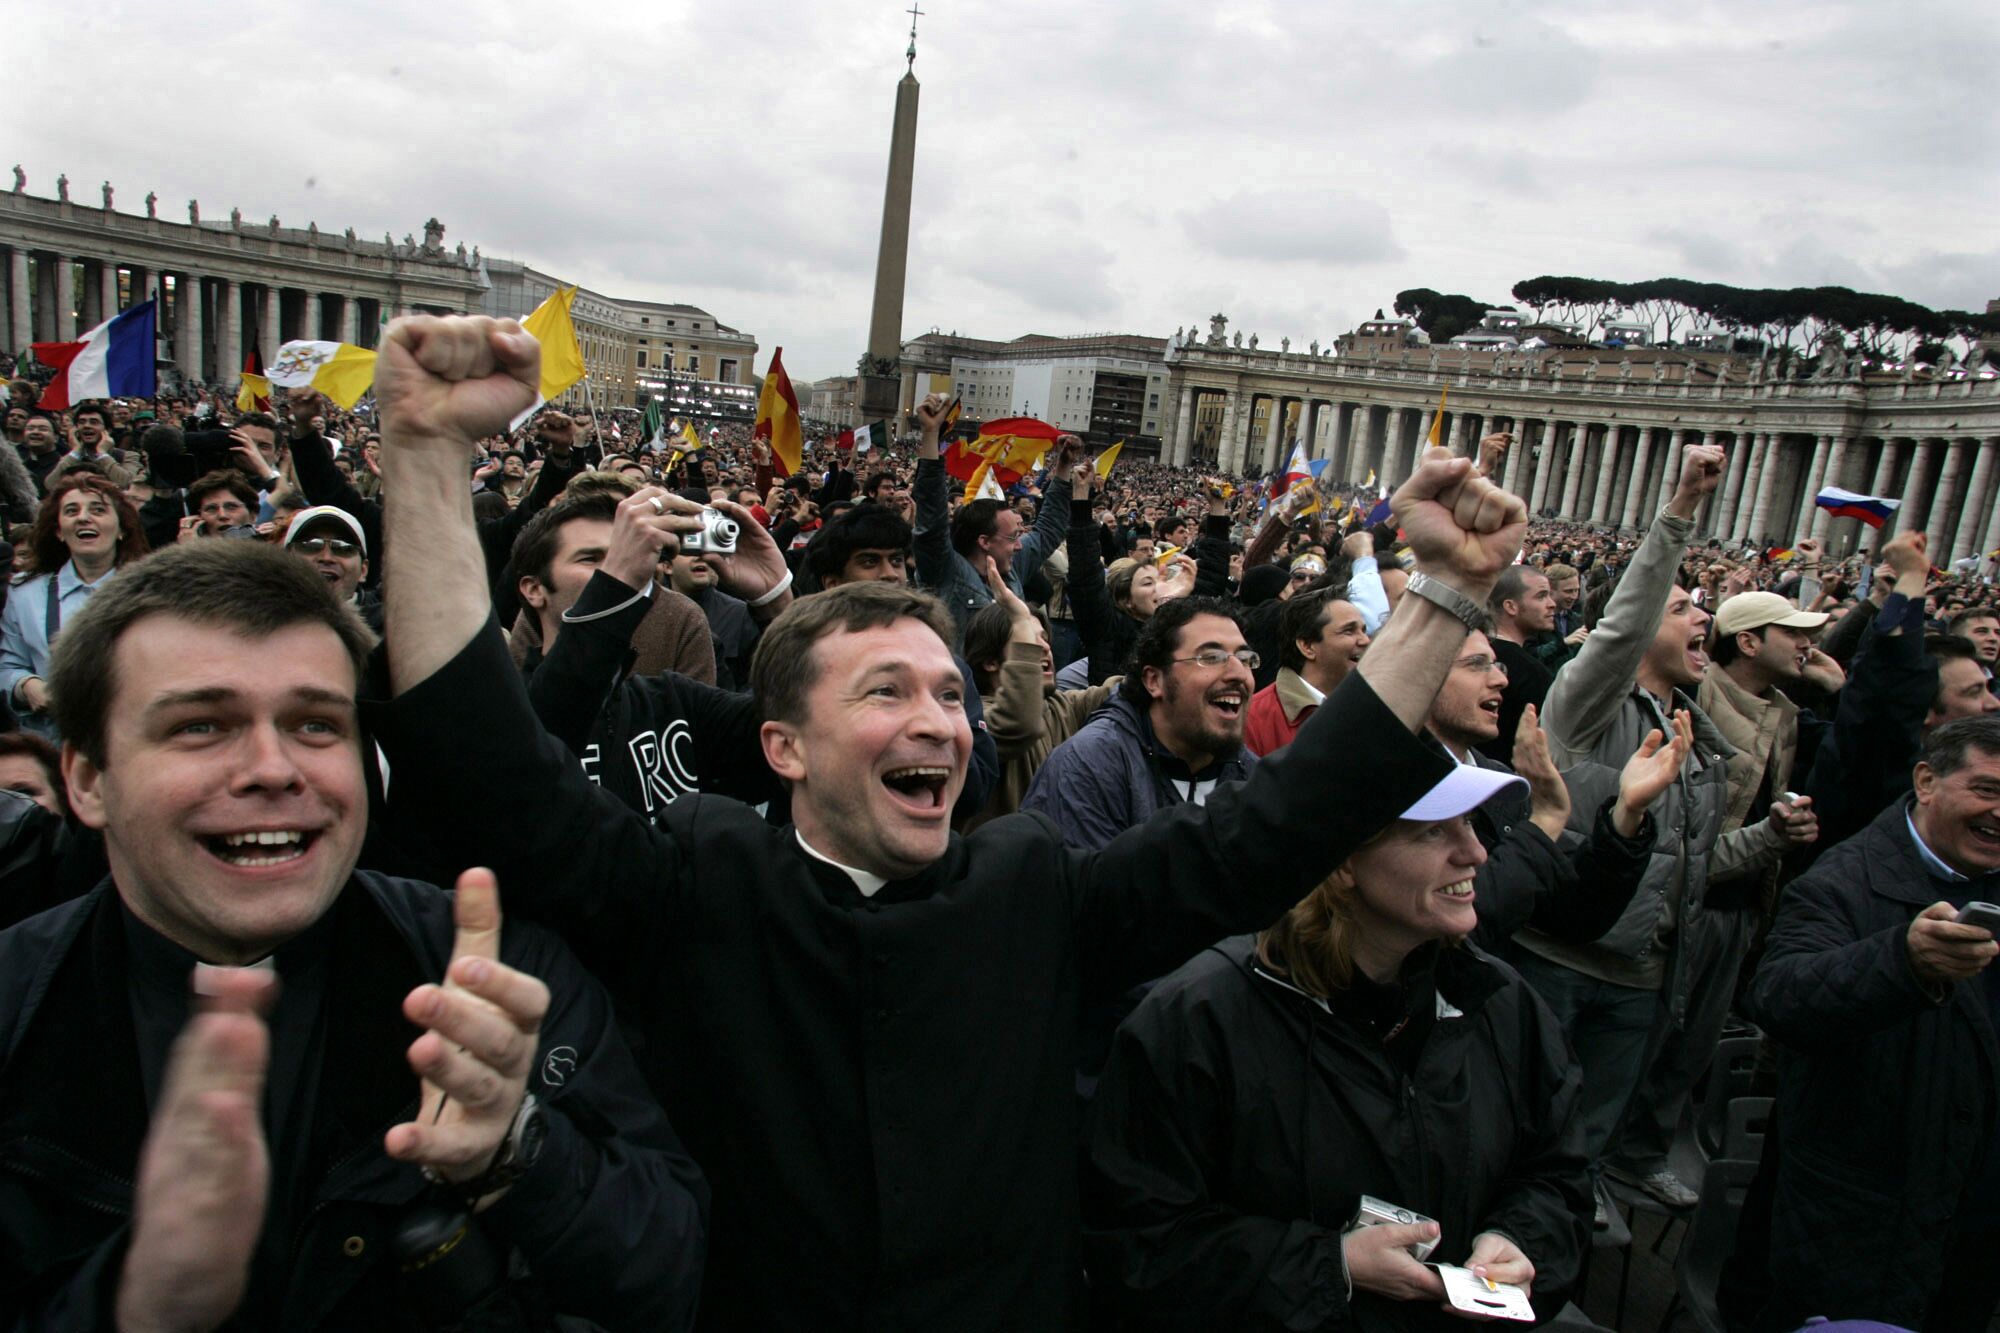 People in St Peter's Square celebrate announcement of new pope.